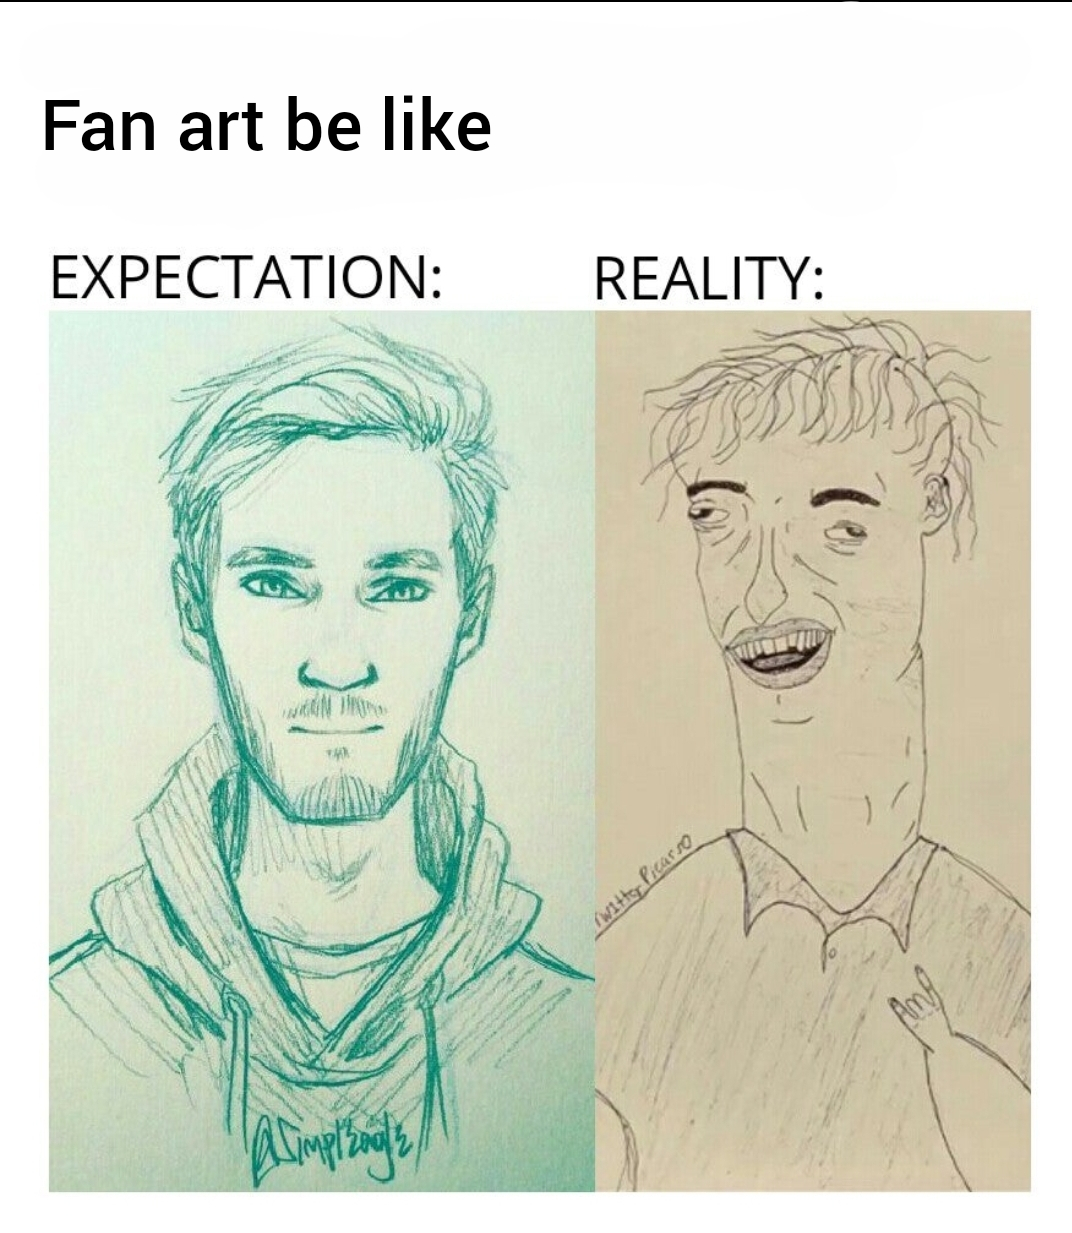 pewdiepie sketch - Fan art be Expectation Reality Simpl 2003